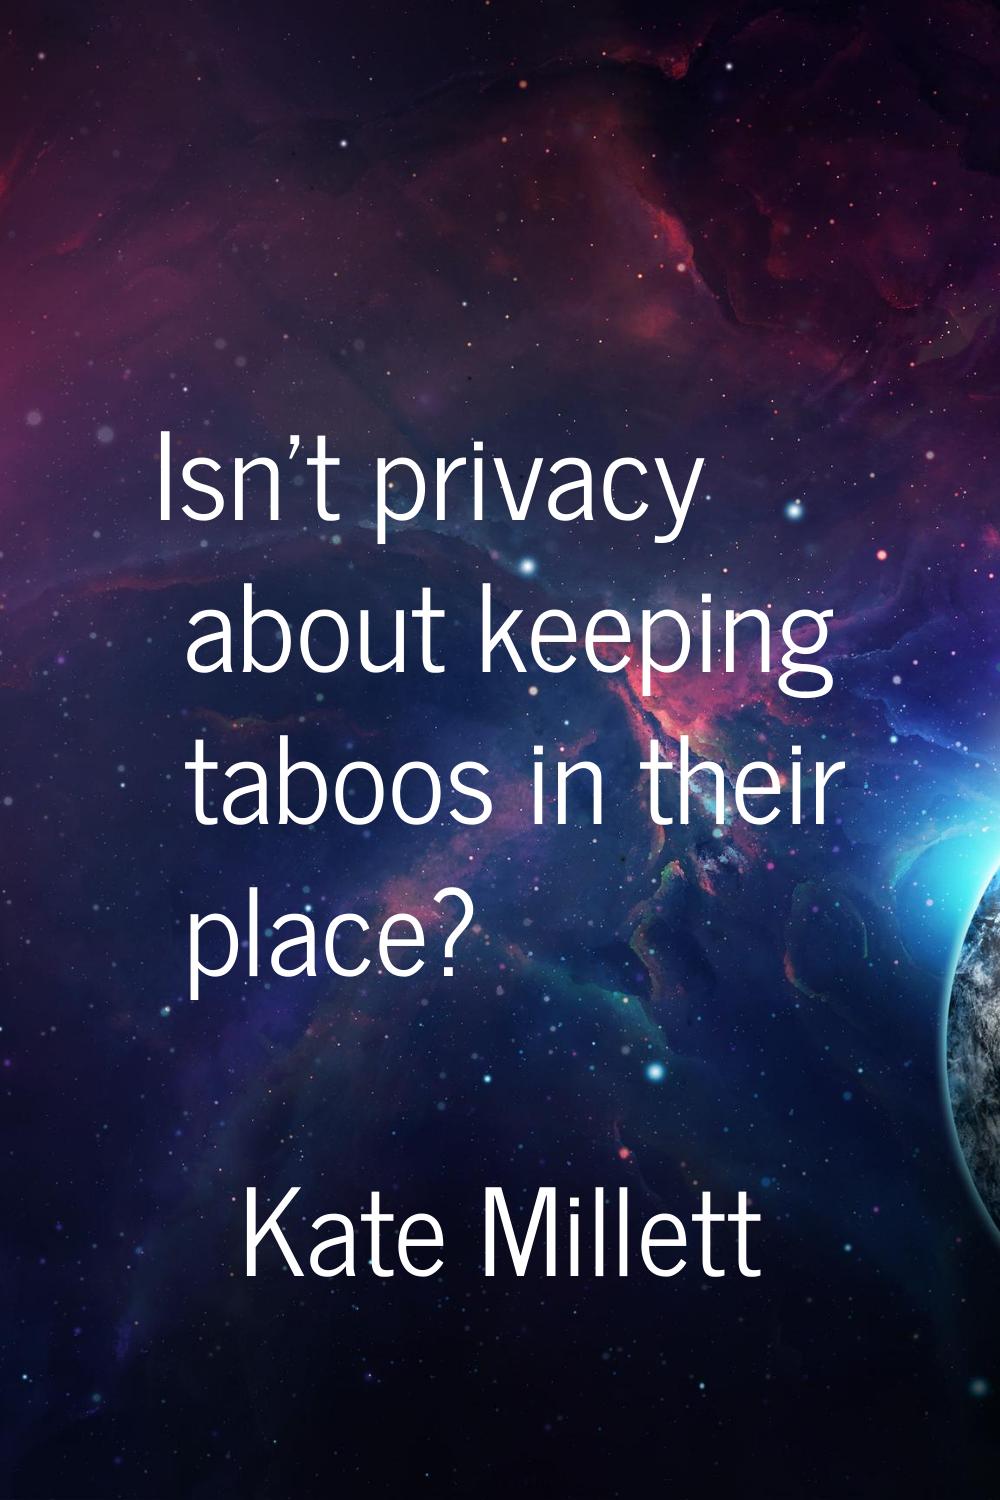 Isn't privacy about keeping taboos in their place?